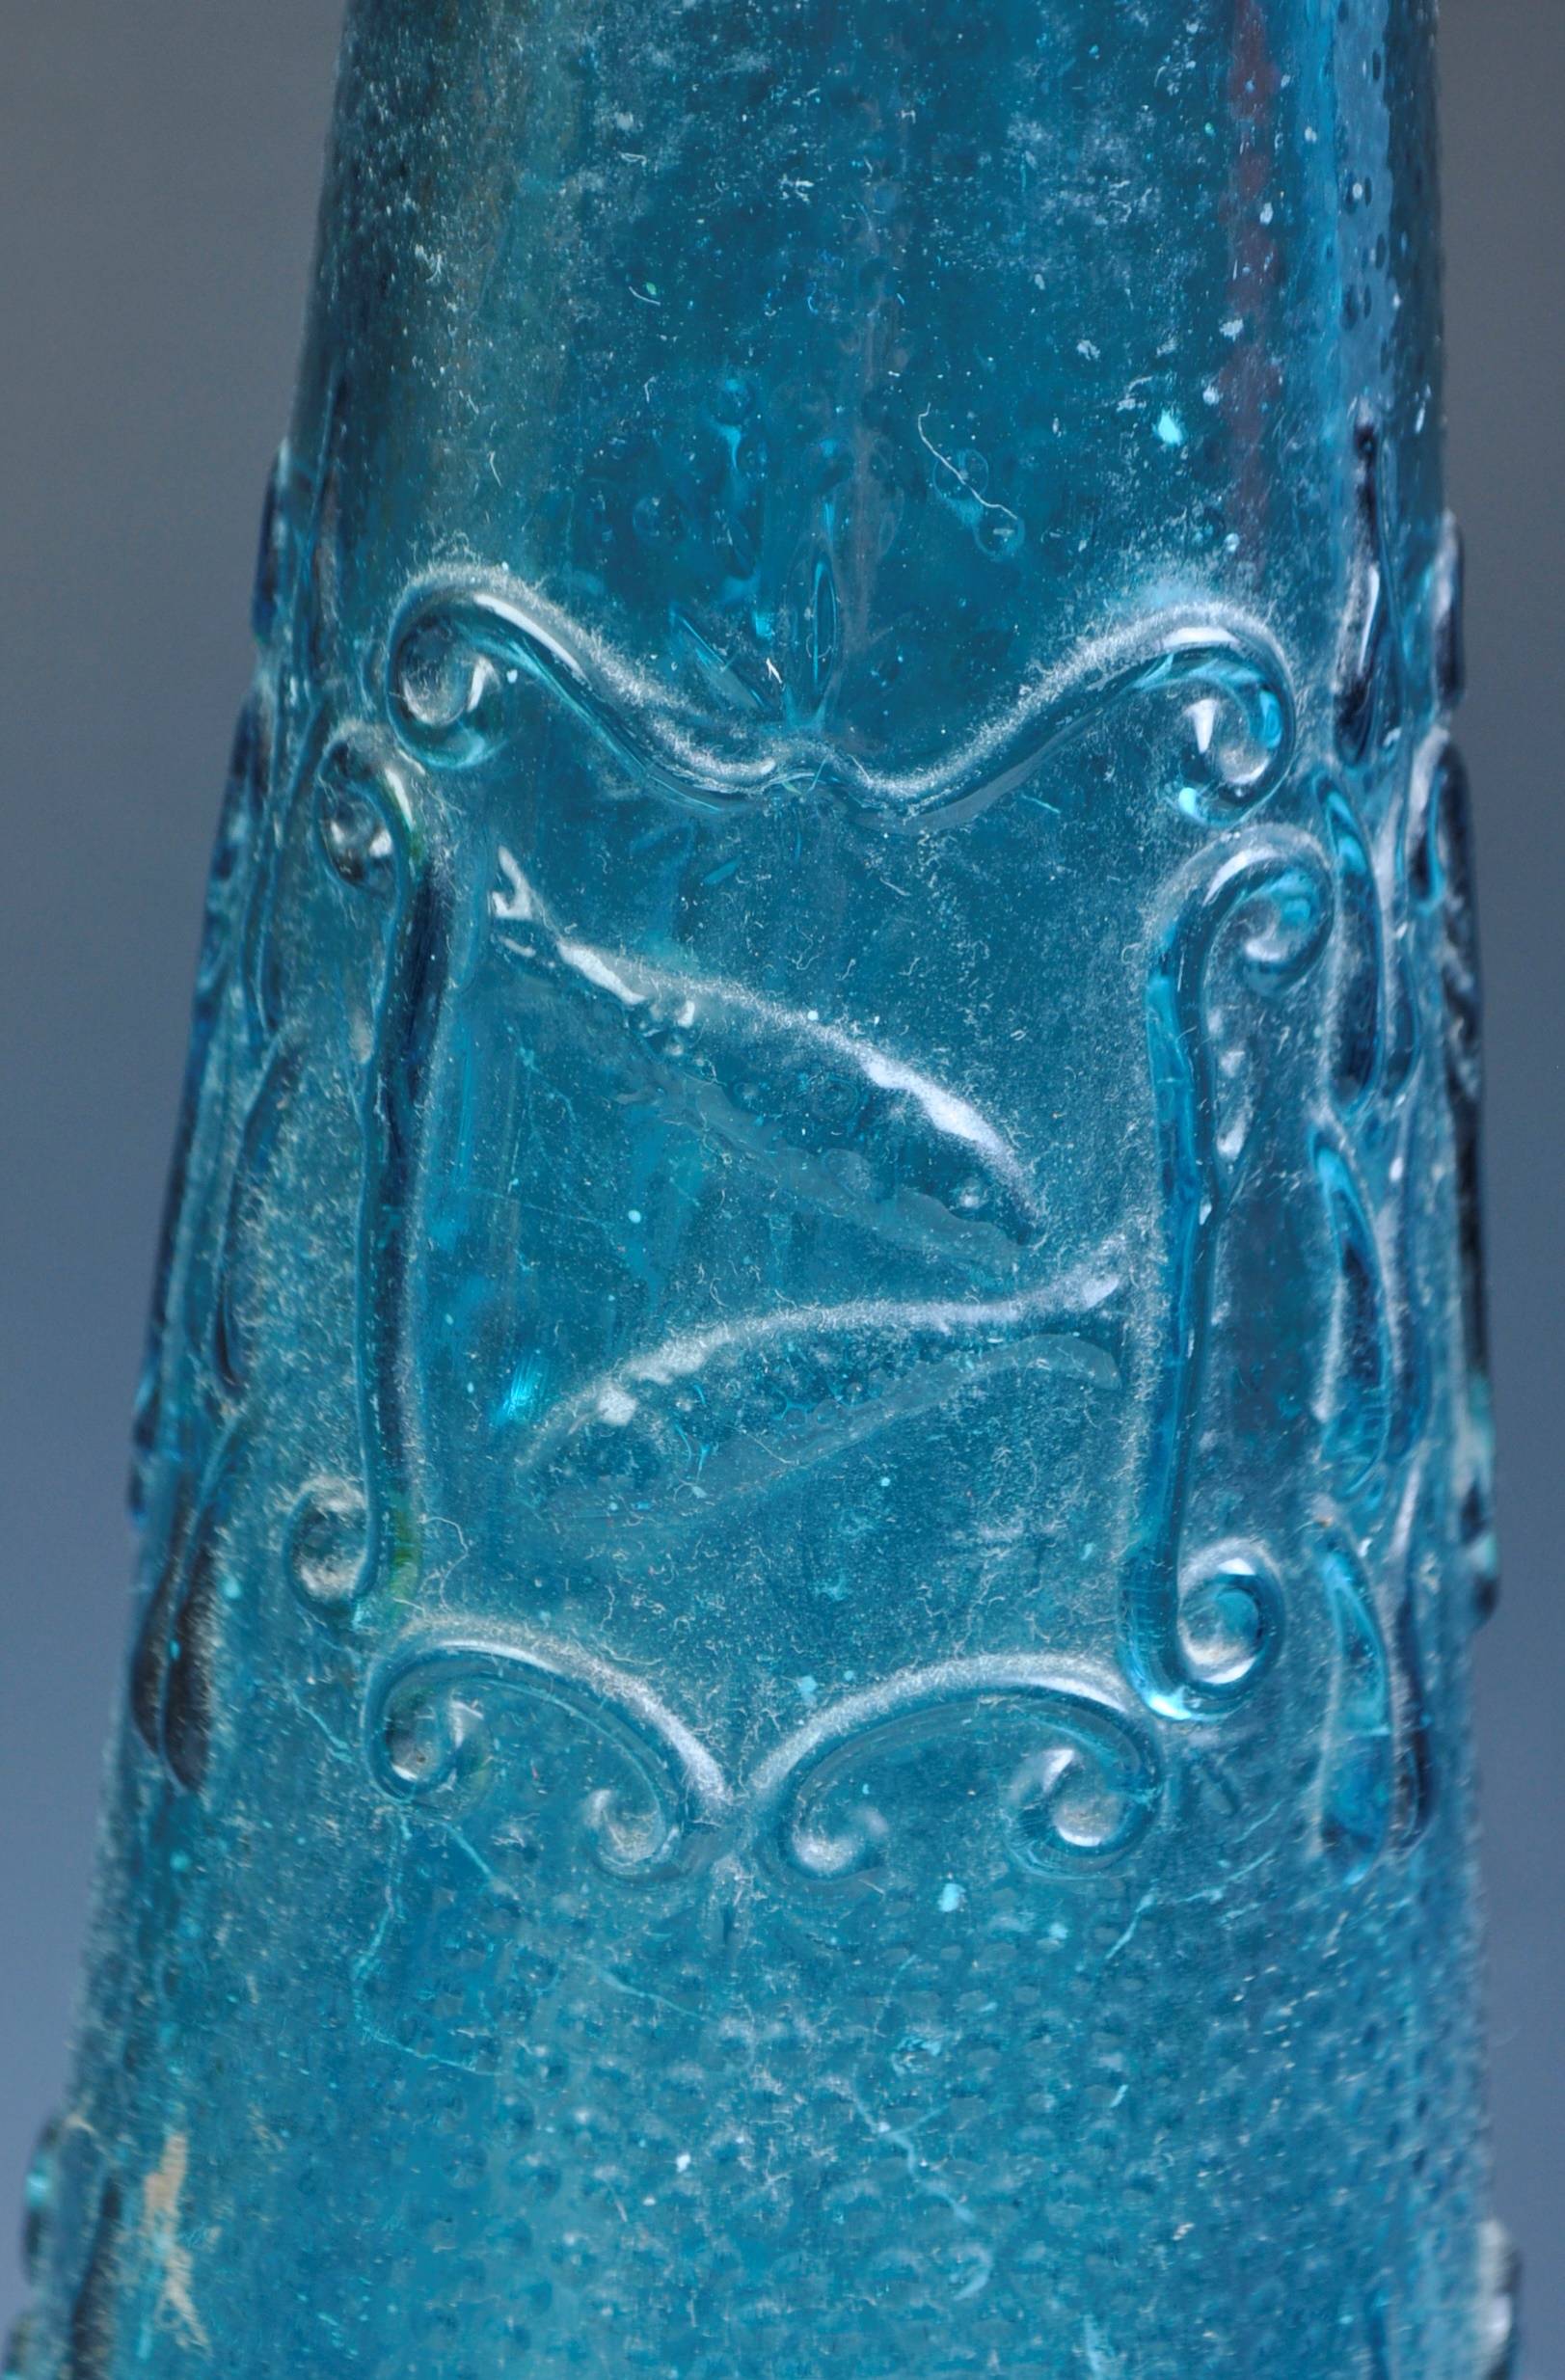 COLLECTION OF EMPOLI ITALIAN GLASS GENIE BOTTLES - Image 4 of 10